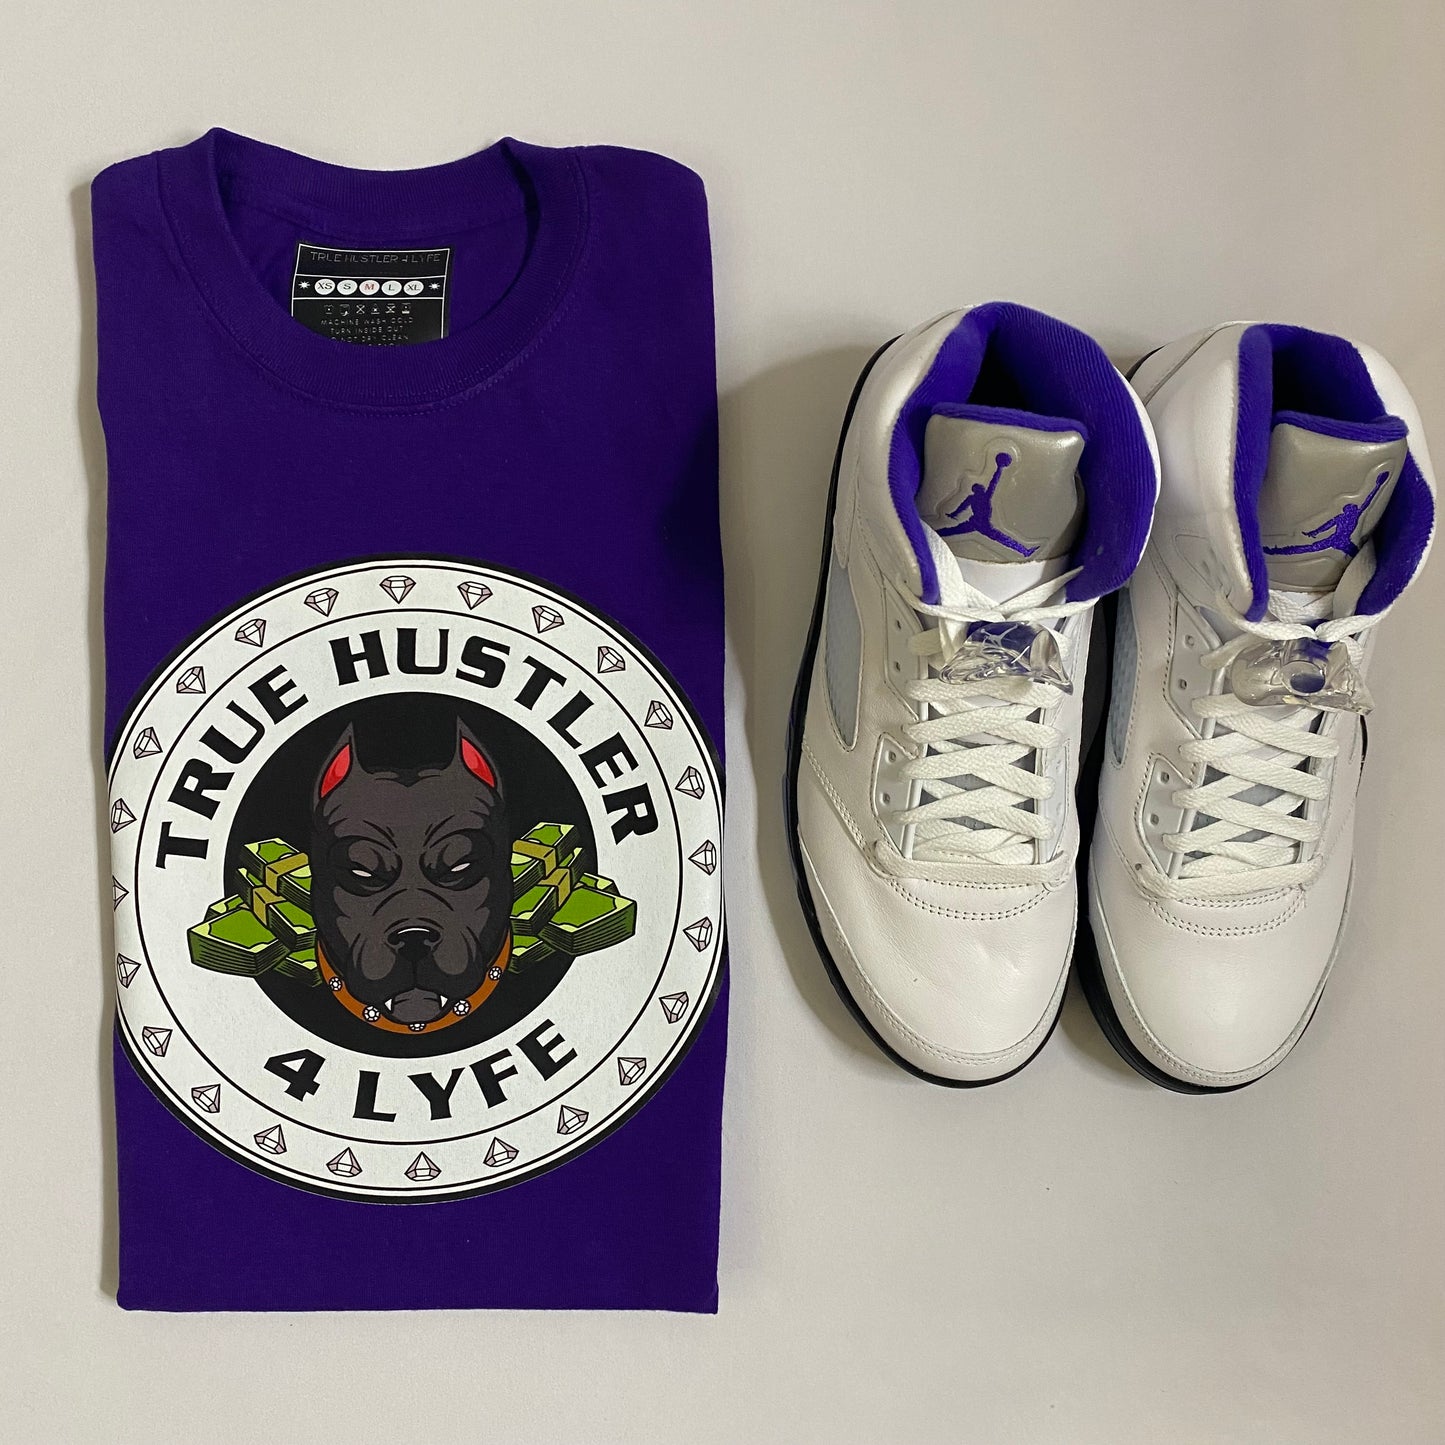 "TH4L Grind Collection Unisex Graphic Tees - Purple Heavy Duty Cotton T-Shirt and White Grind Logo Tee"